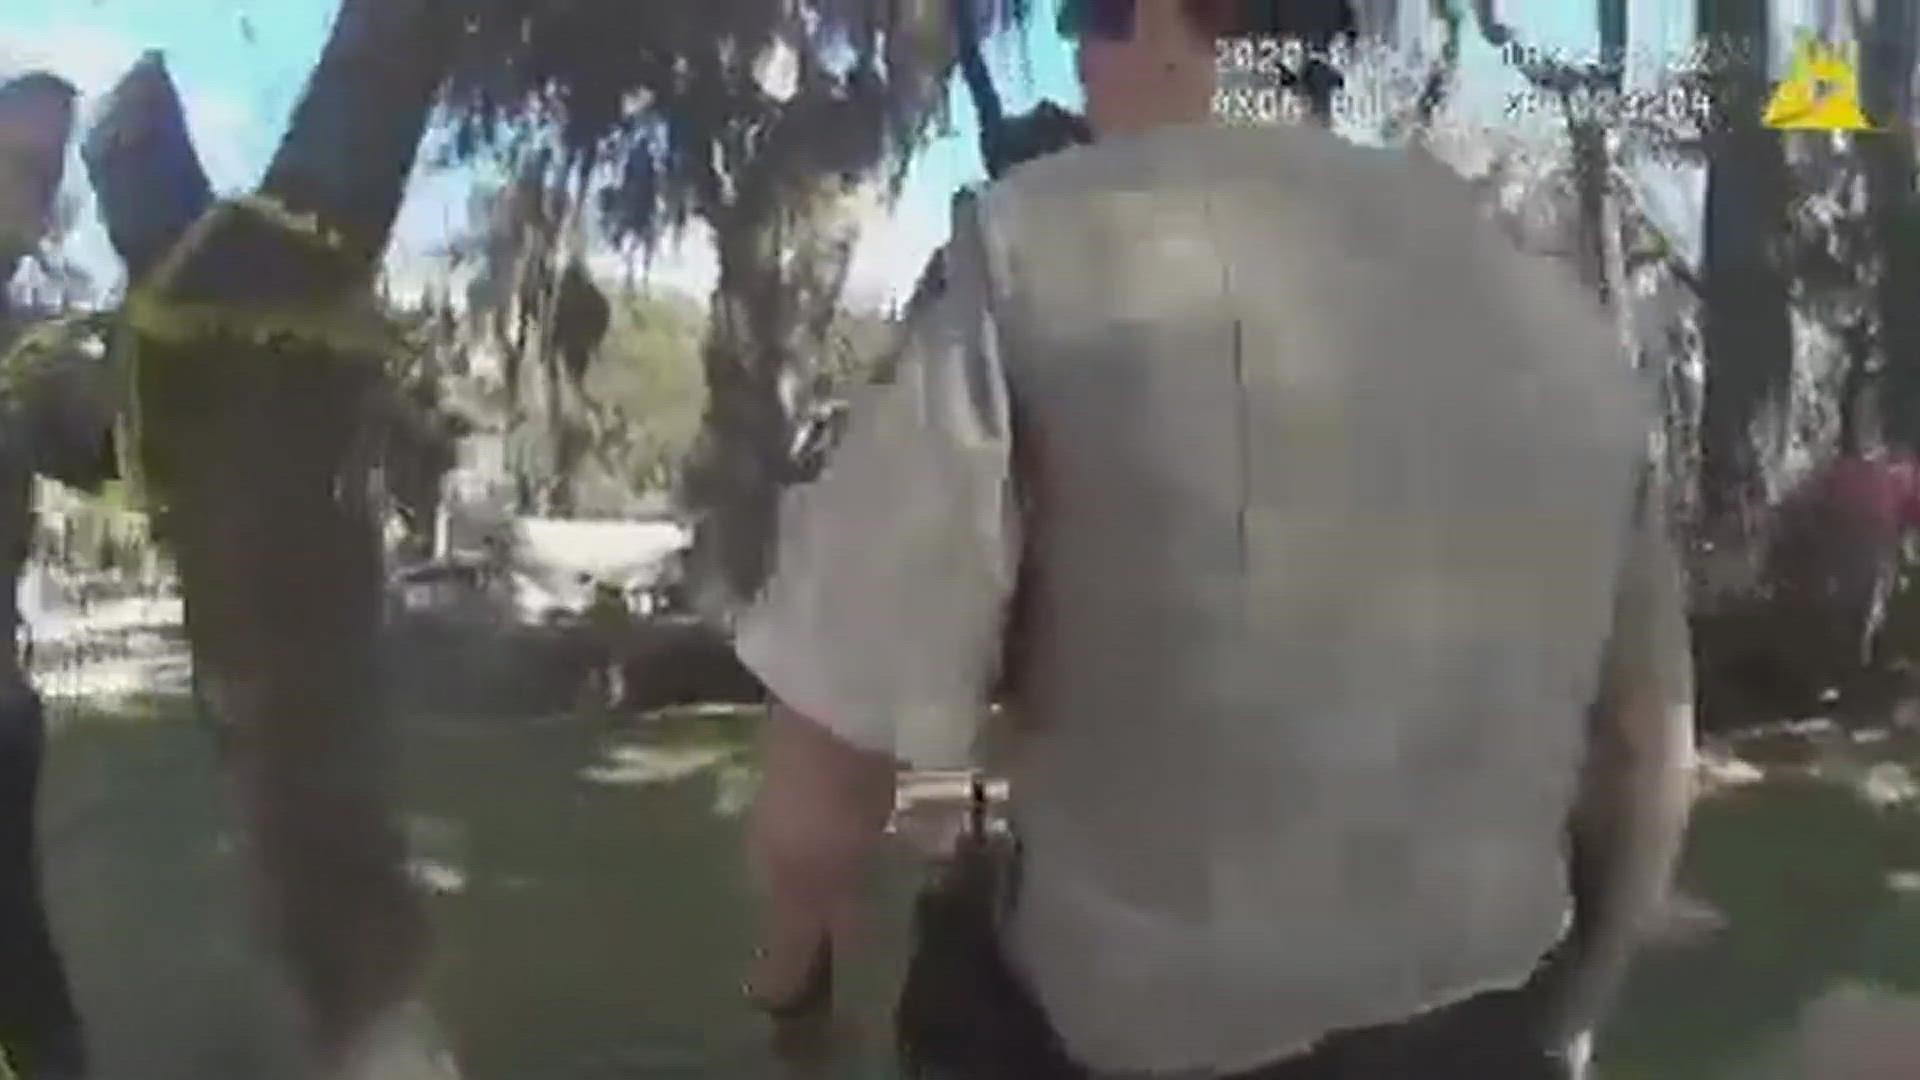 At one point, Gregory McMichael shows the officer his hands. The left one has blood on them, the video shows. WARNING: Viewer discretion advised.